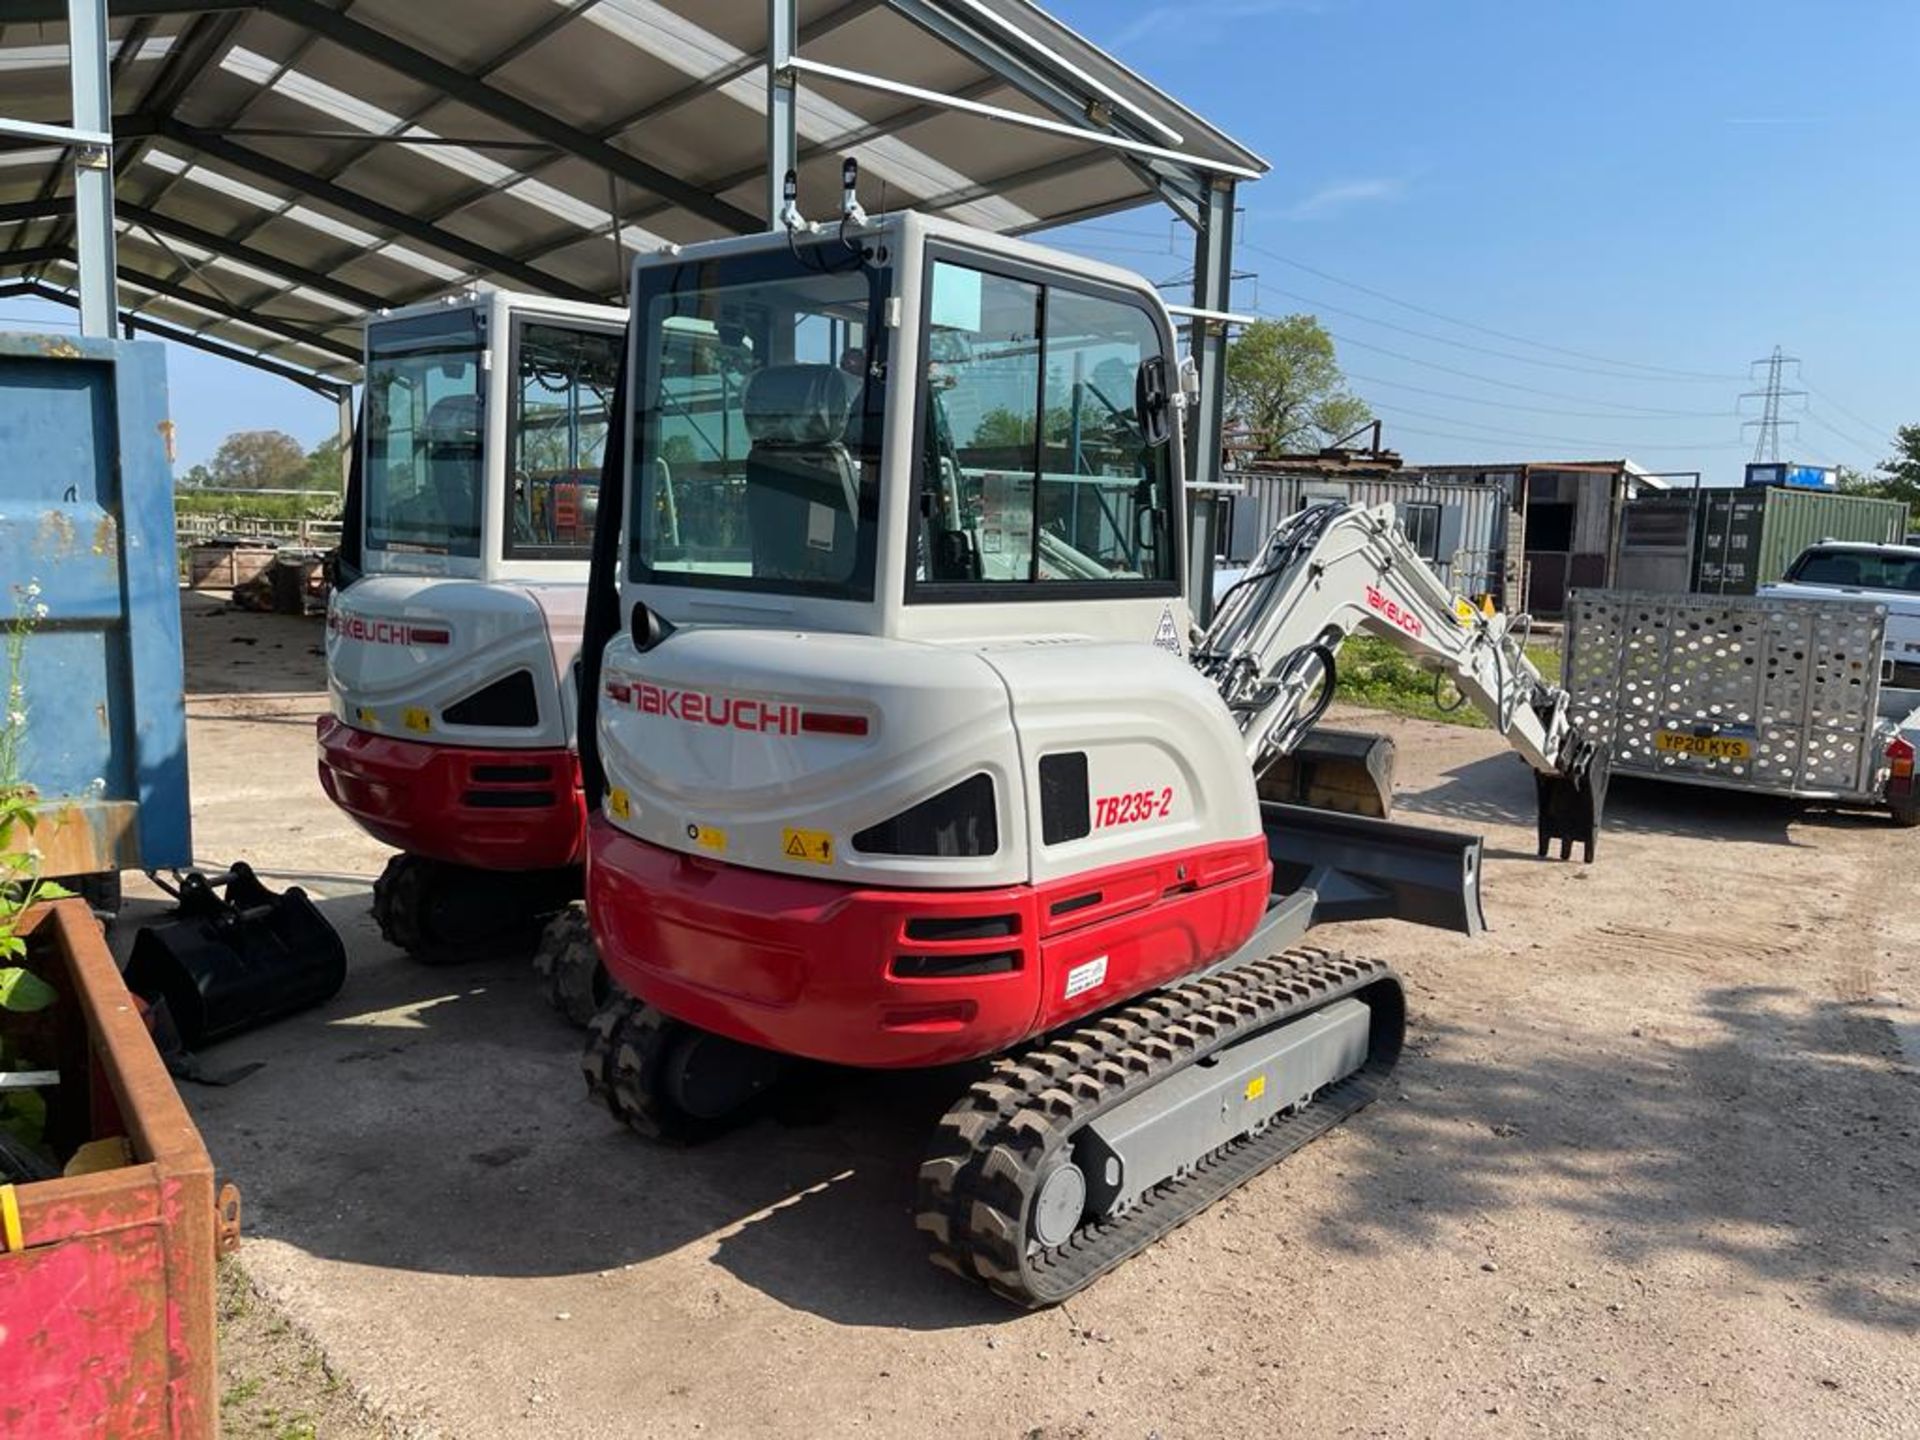 2021 ONLY 60 hrs ! Takeuchi TB235 -2 3.5 Ton Excavator HYD QUICK HITCH *PLUS VAT* - Image 3 of 5